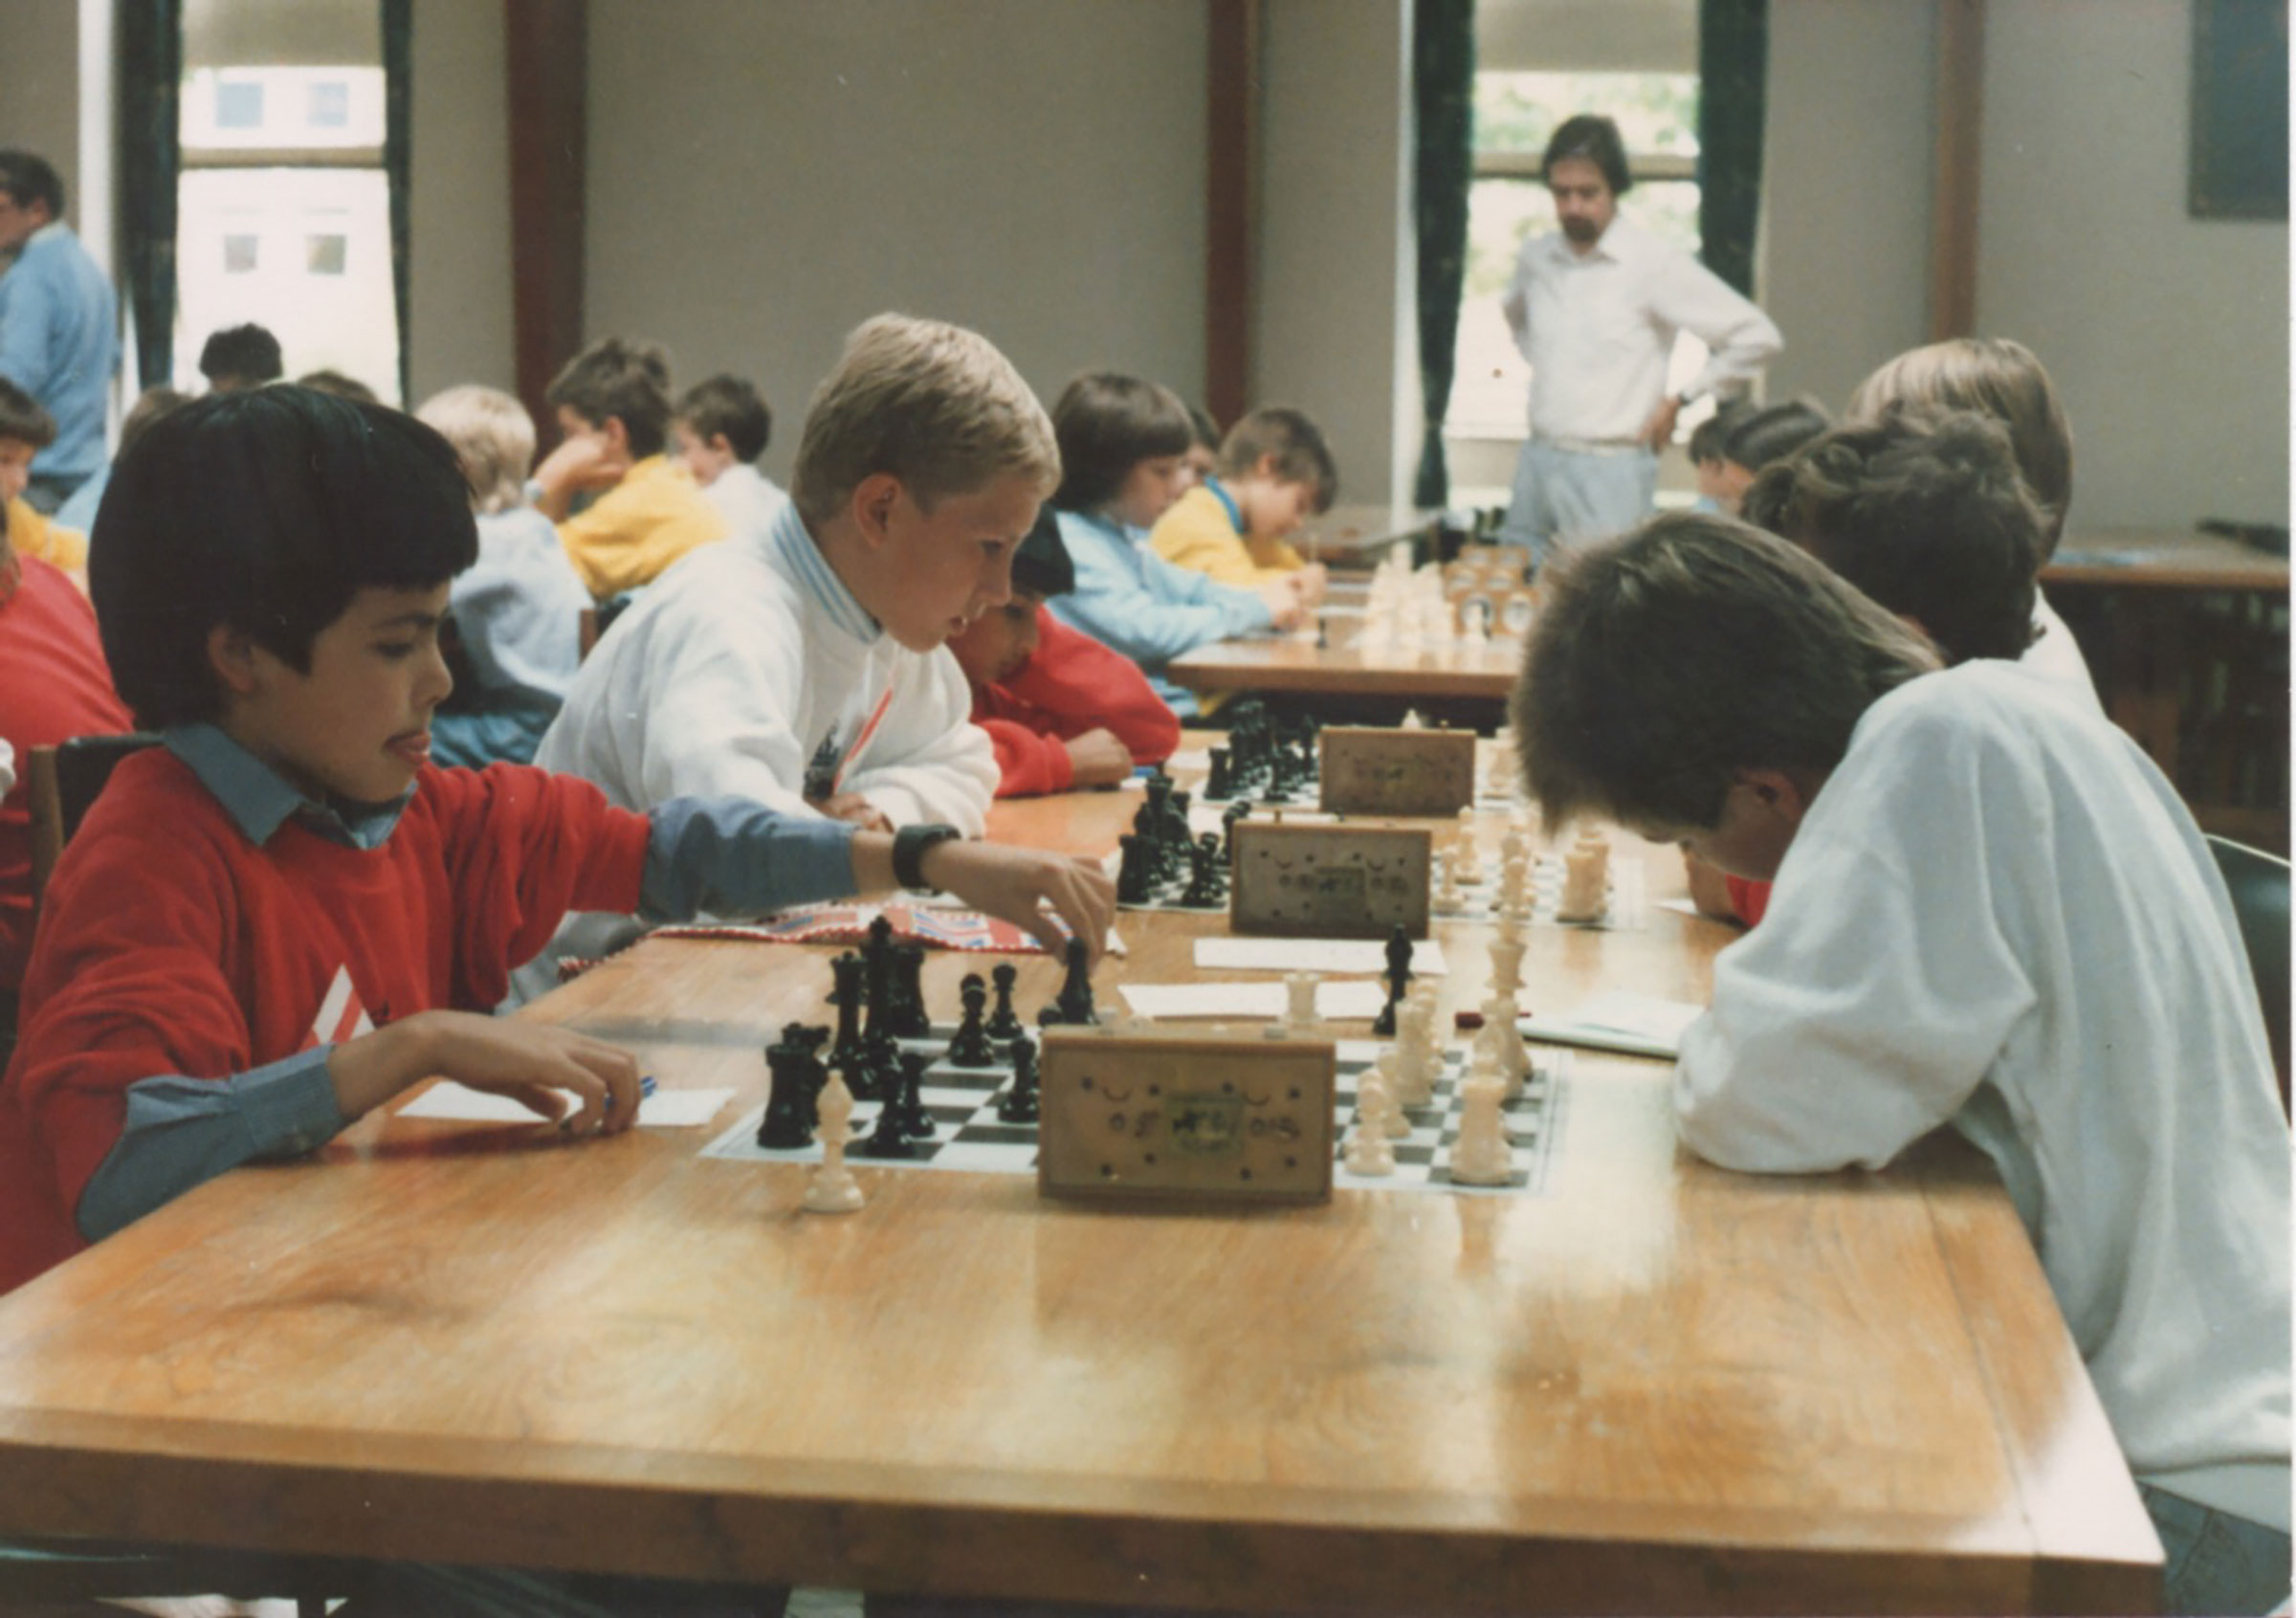 Hassabis, left, captaining the England under-11s chess team at the age of 9 (Courtesy Demis Hassabis)